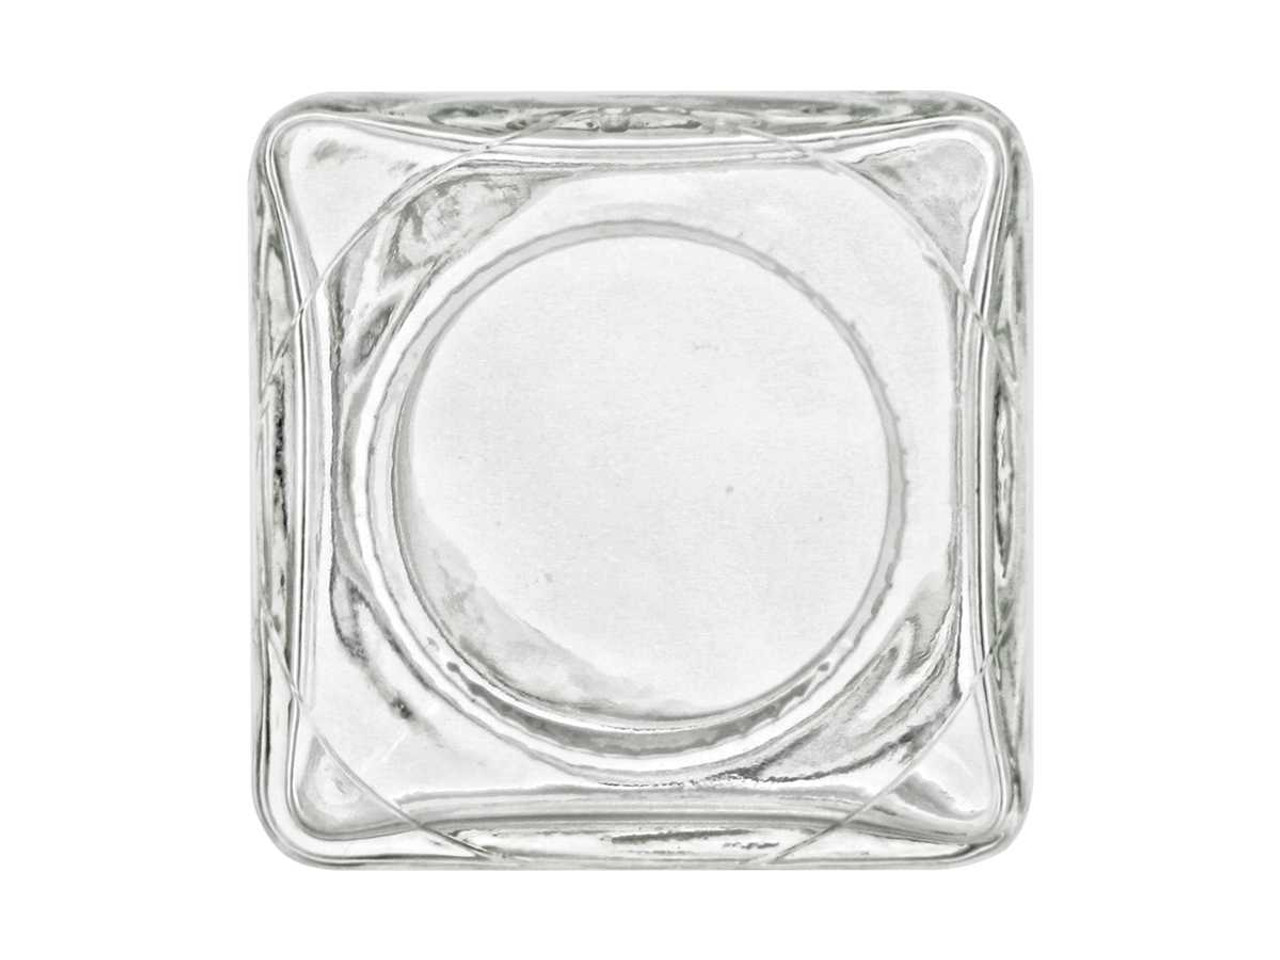 4 oz Cube Square Glass Jars with Lid - Made in Europe